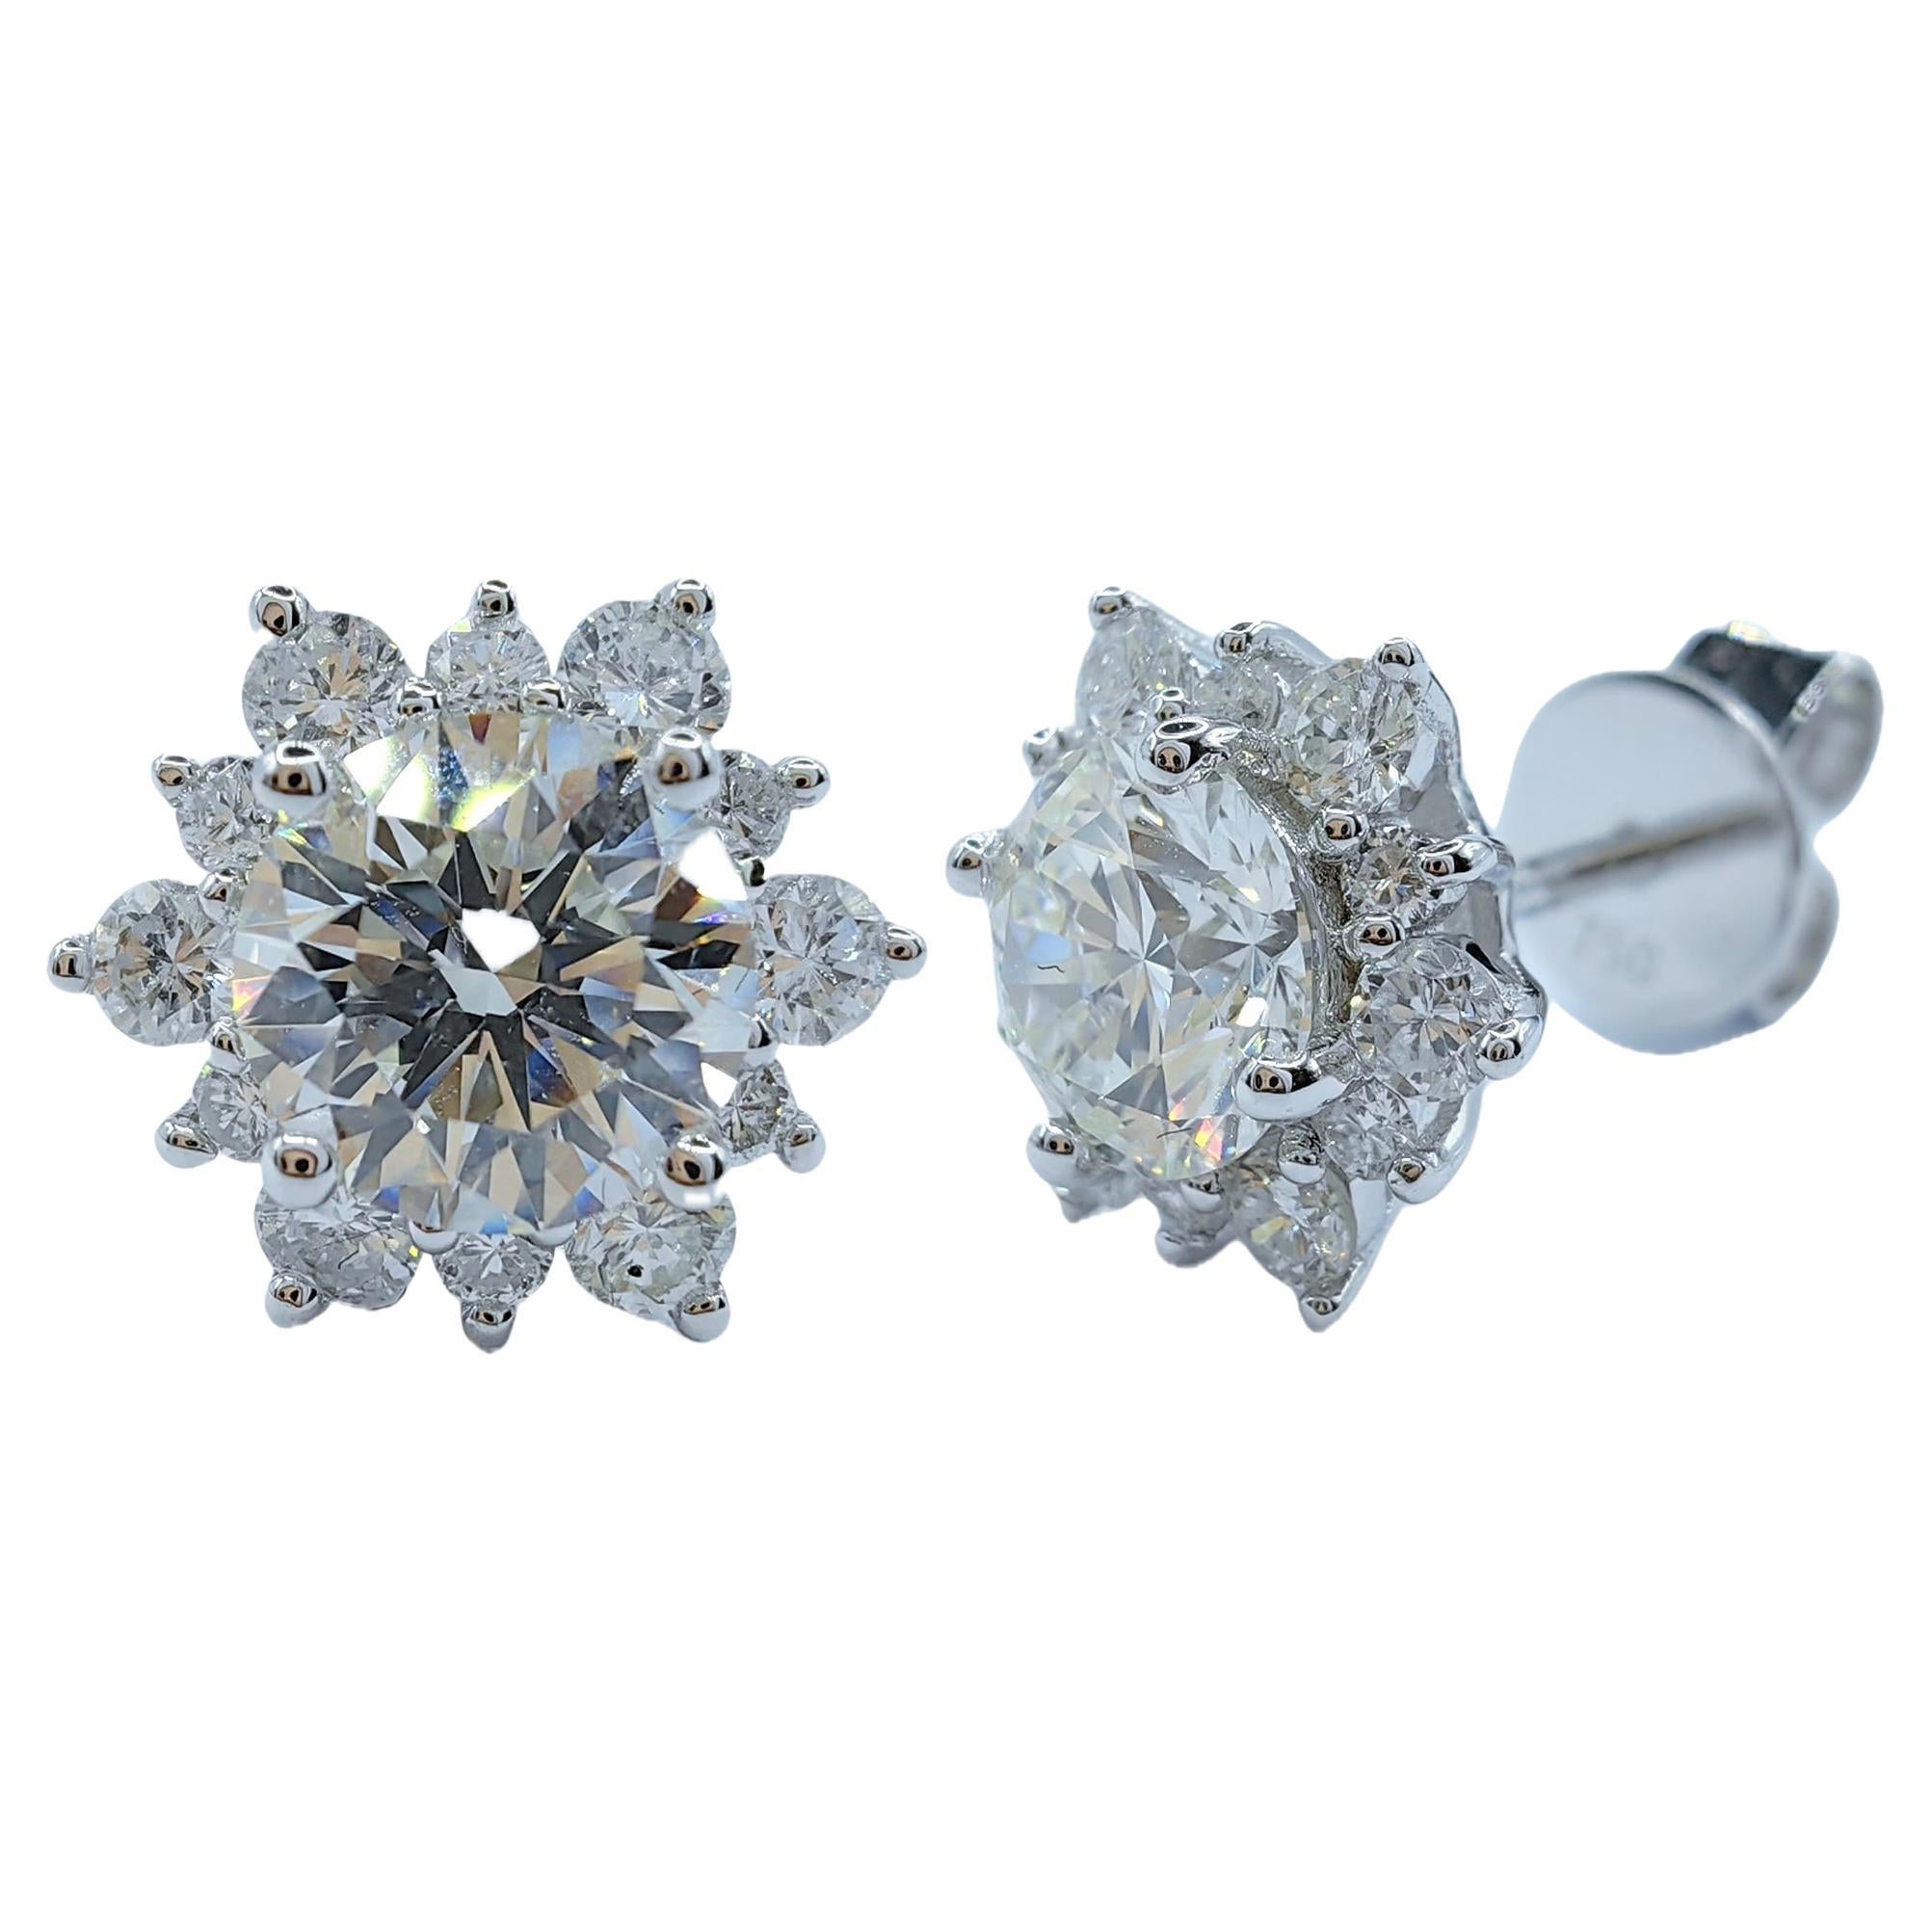 Create Your Own Snowflake Flower Diamond Halo Stud Earrings With Any Stone/Metal For Sale